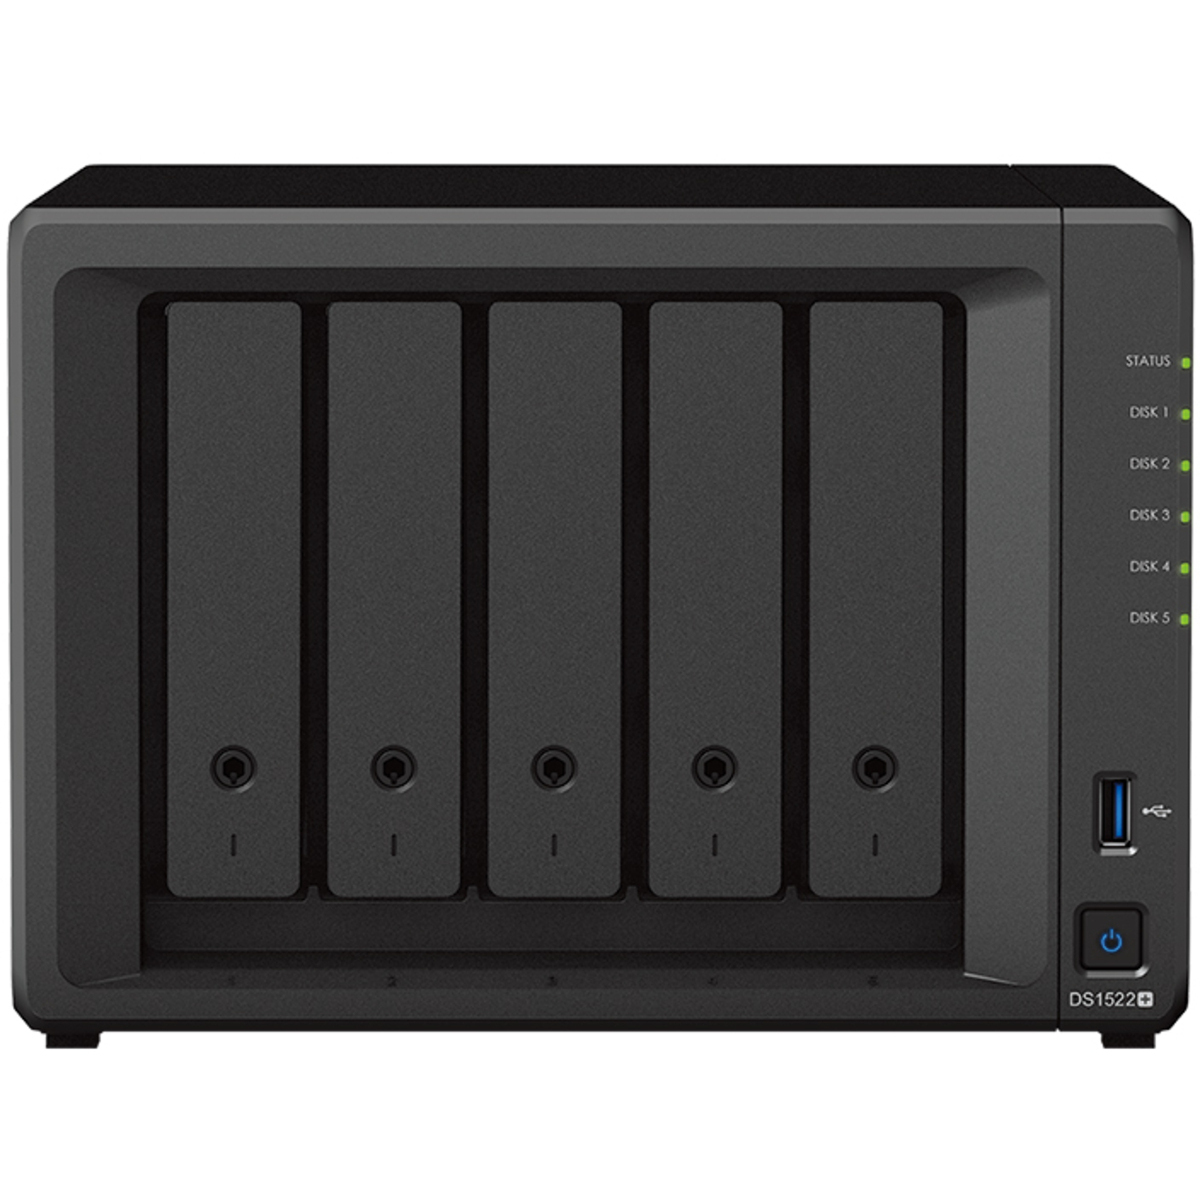 Synology DiskStation DS1522+ 10tb 5-Bay Desktop Multimedia / Power User / Business NAS - Network Attached Storage Device 5x2tb Sandisk Ultra 3D SDSSDH3-2T00 2.5 560/520MB/s SATA 6Gb/s SSD CONSUMER Class Drives Installed - Burn-In Tested - ON SALE DiskStation DS1522+